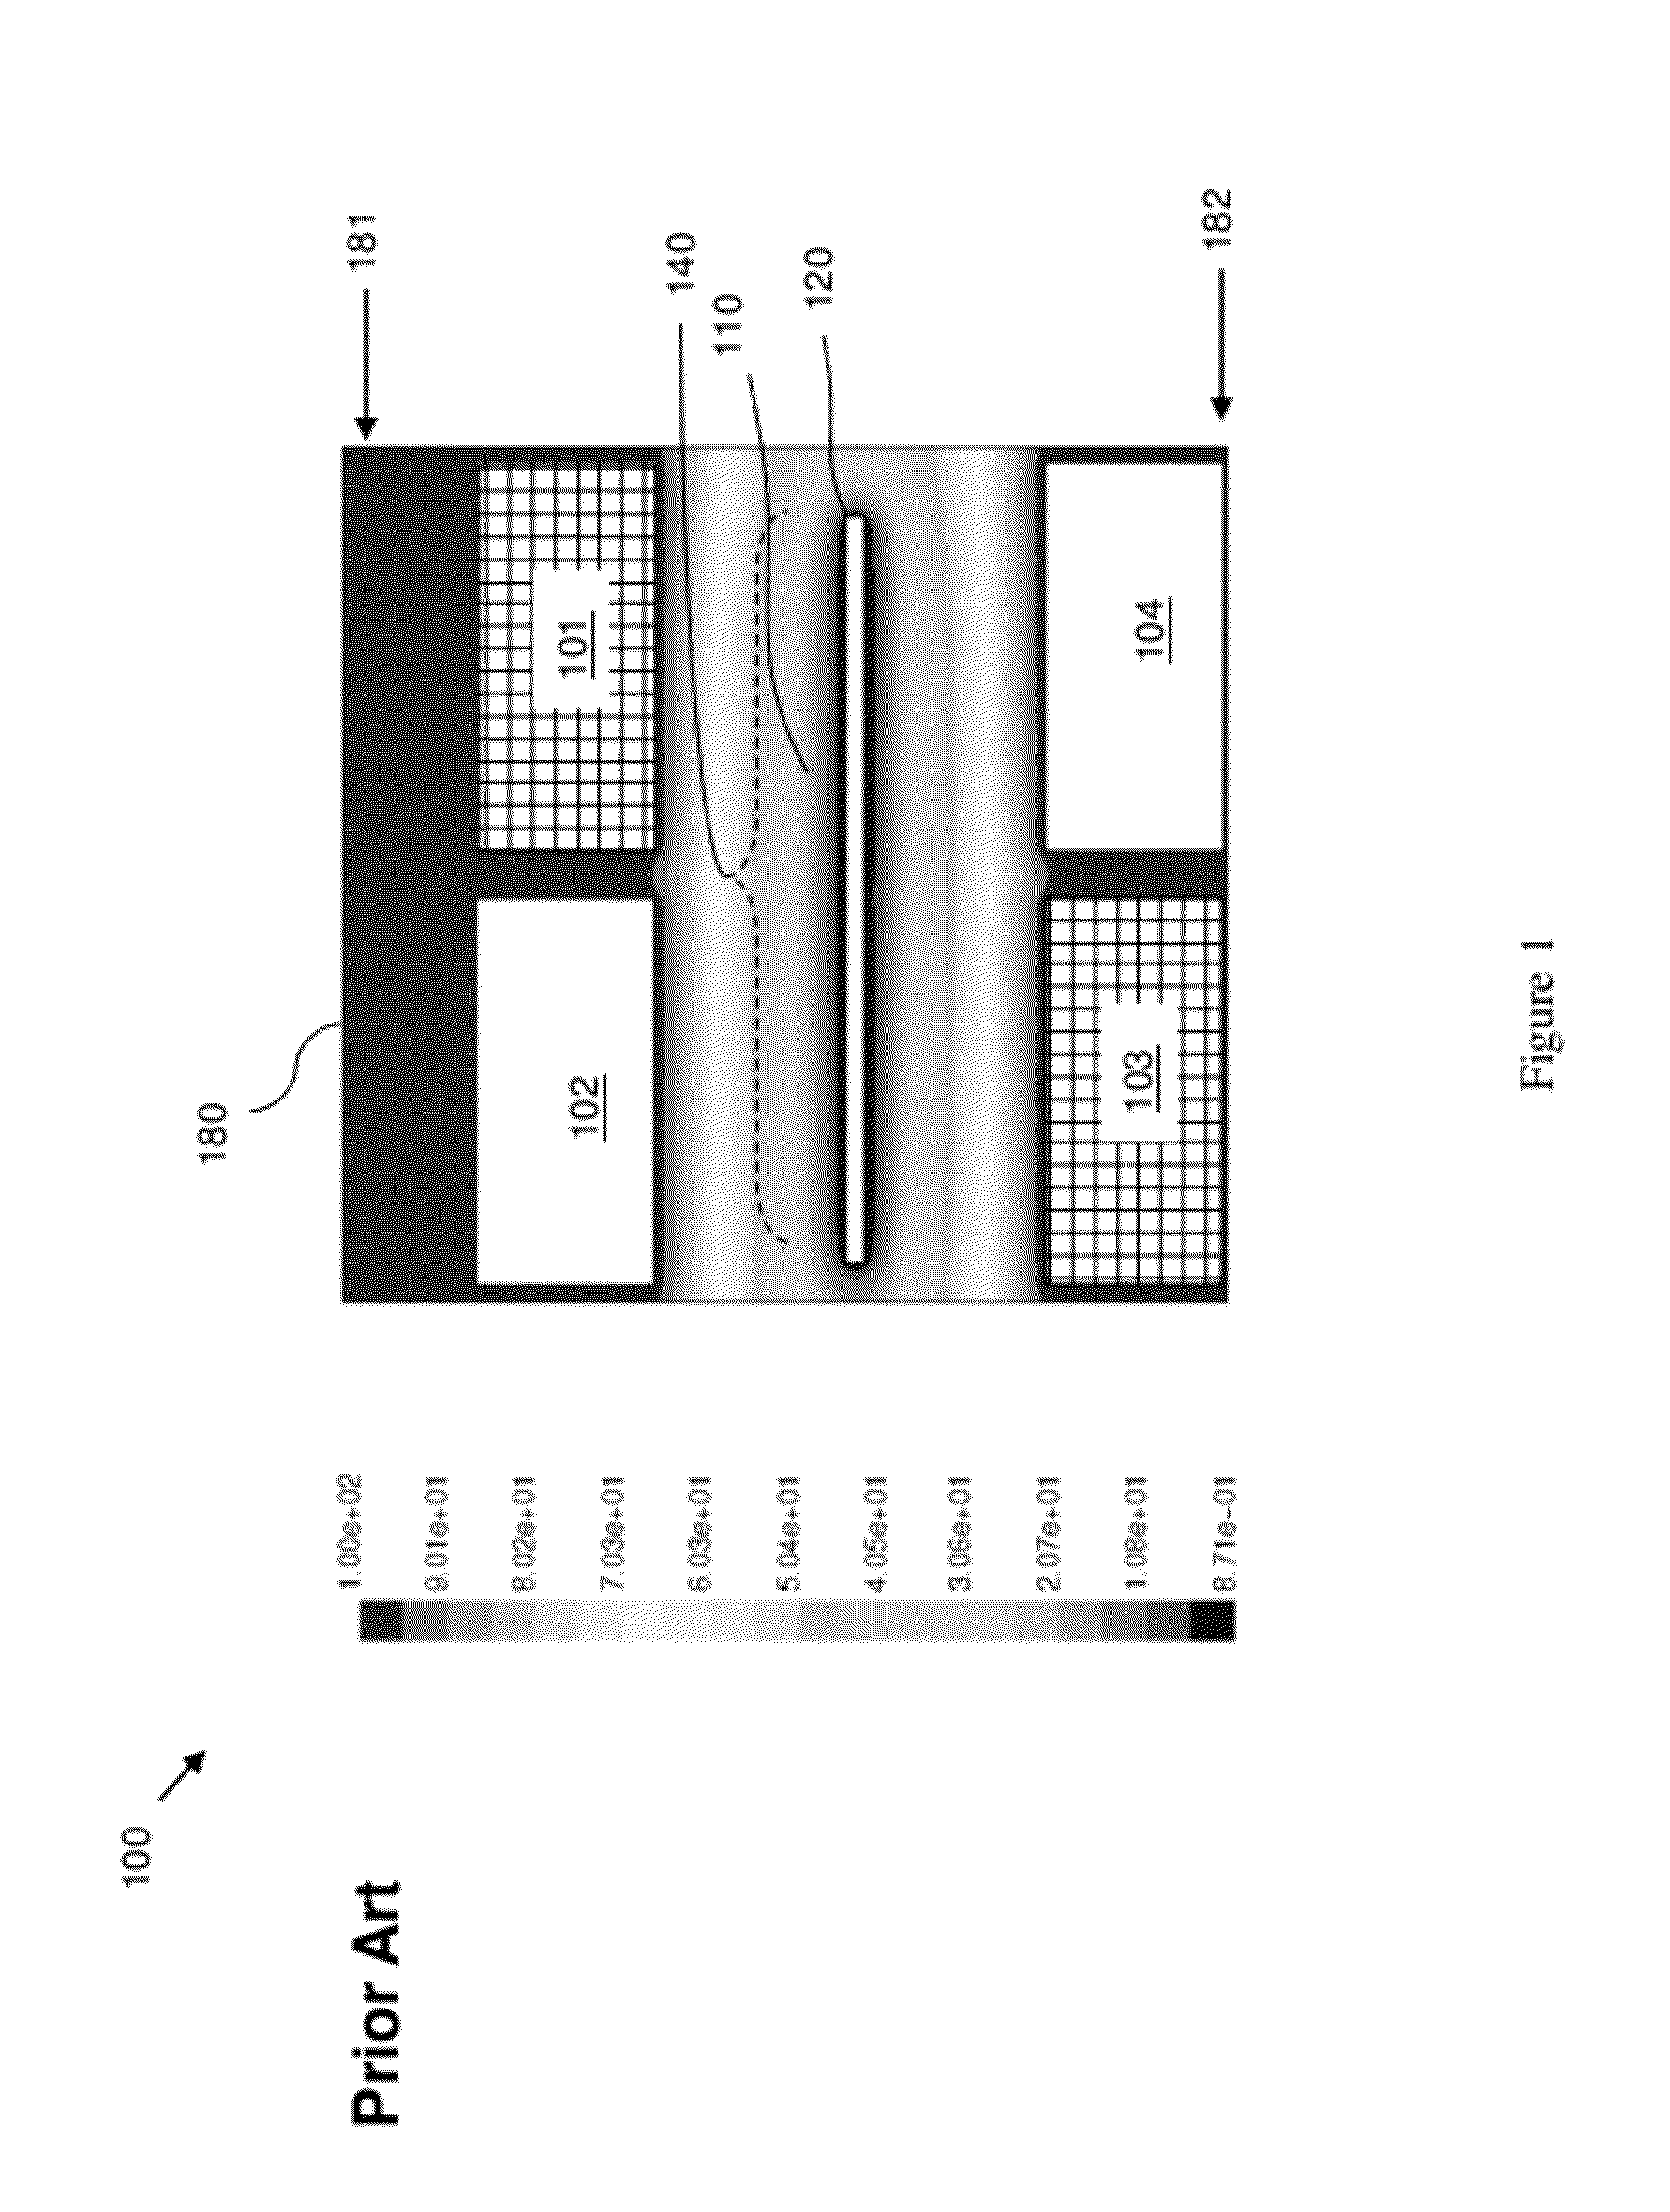 Multi-anode system for uniform plating of alloys